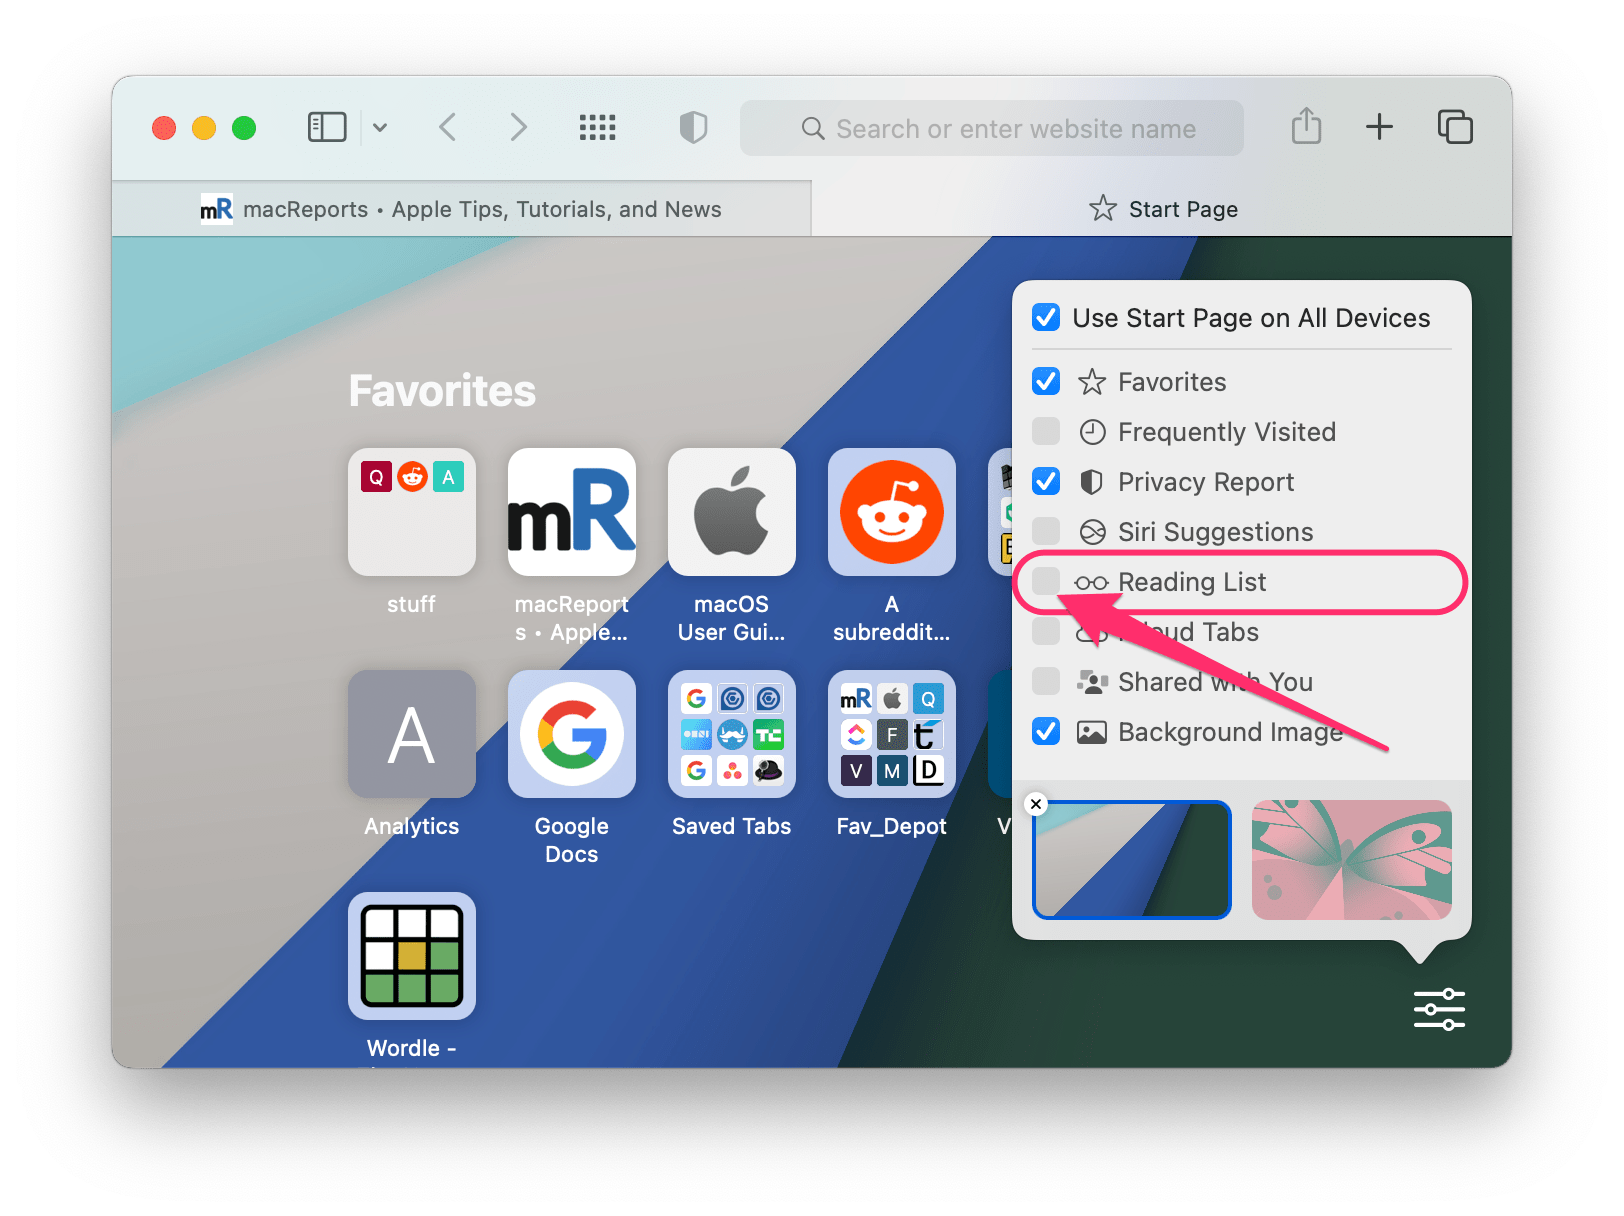 remove reading list from start page on Mac